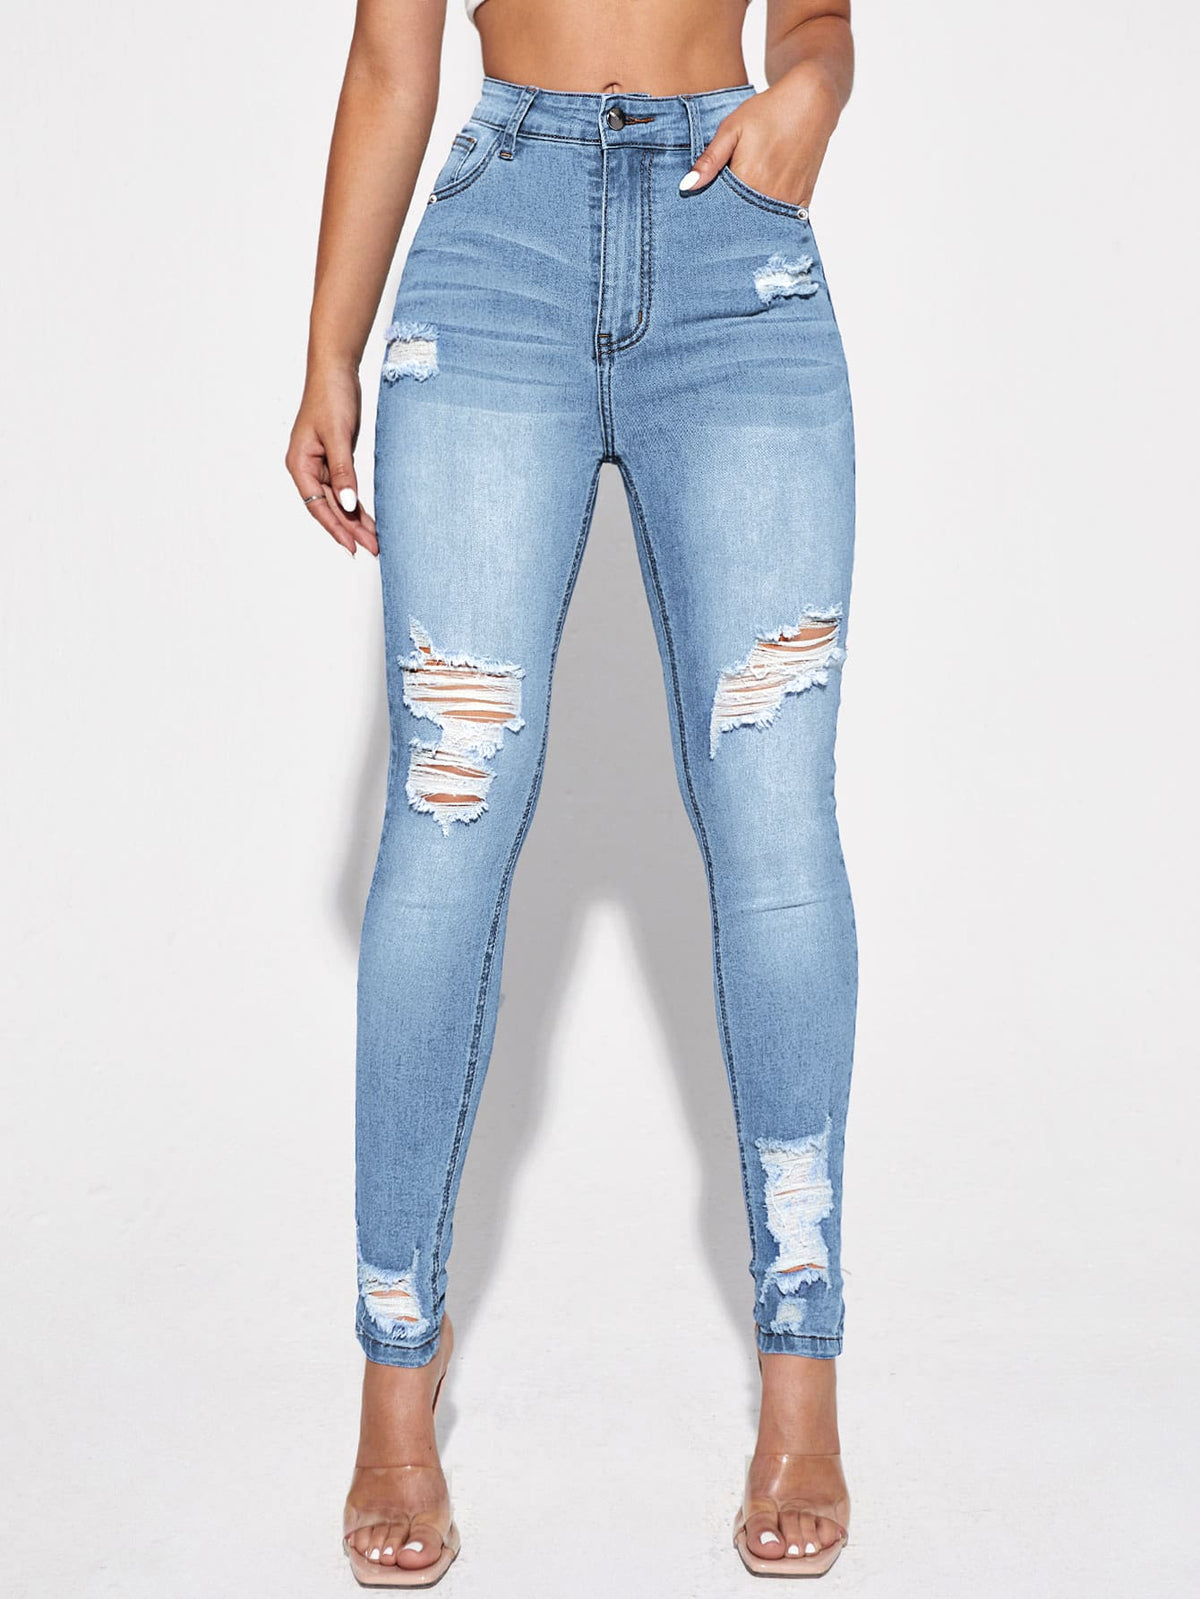 Ripped Skinny Jeans with High Waist